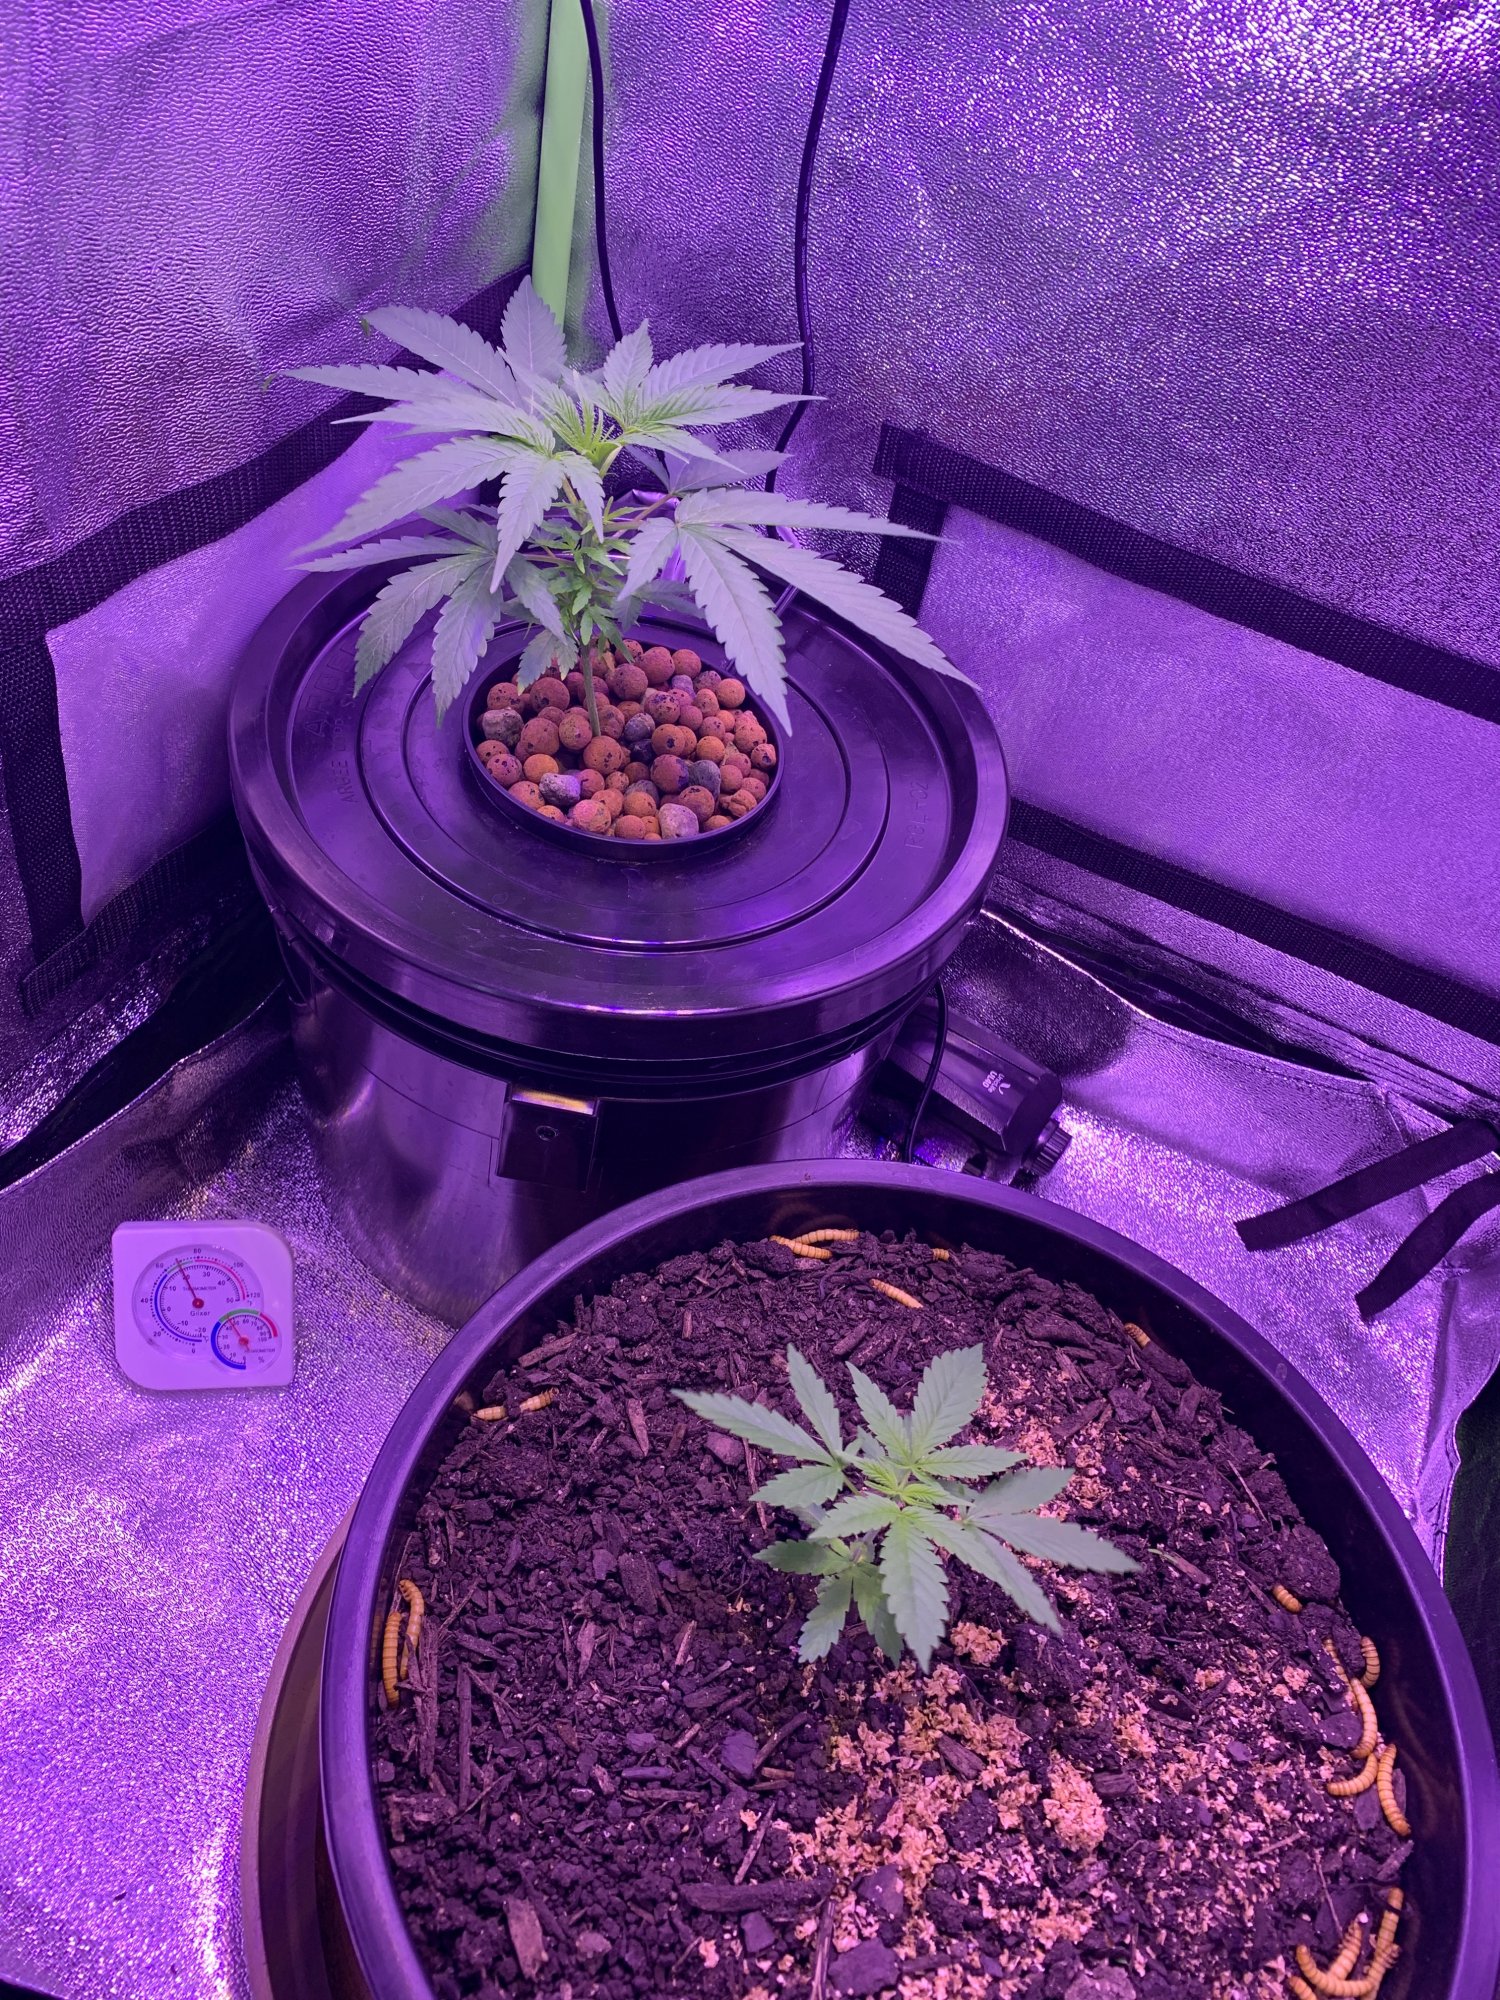 When should i flip to flowering stage